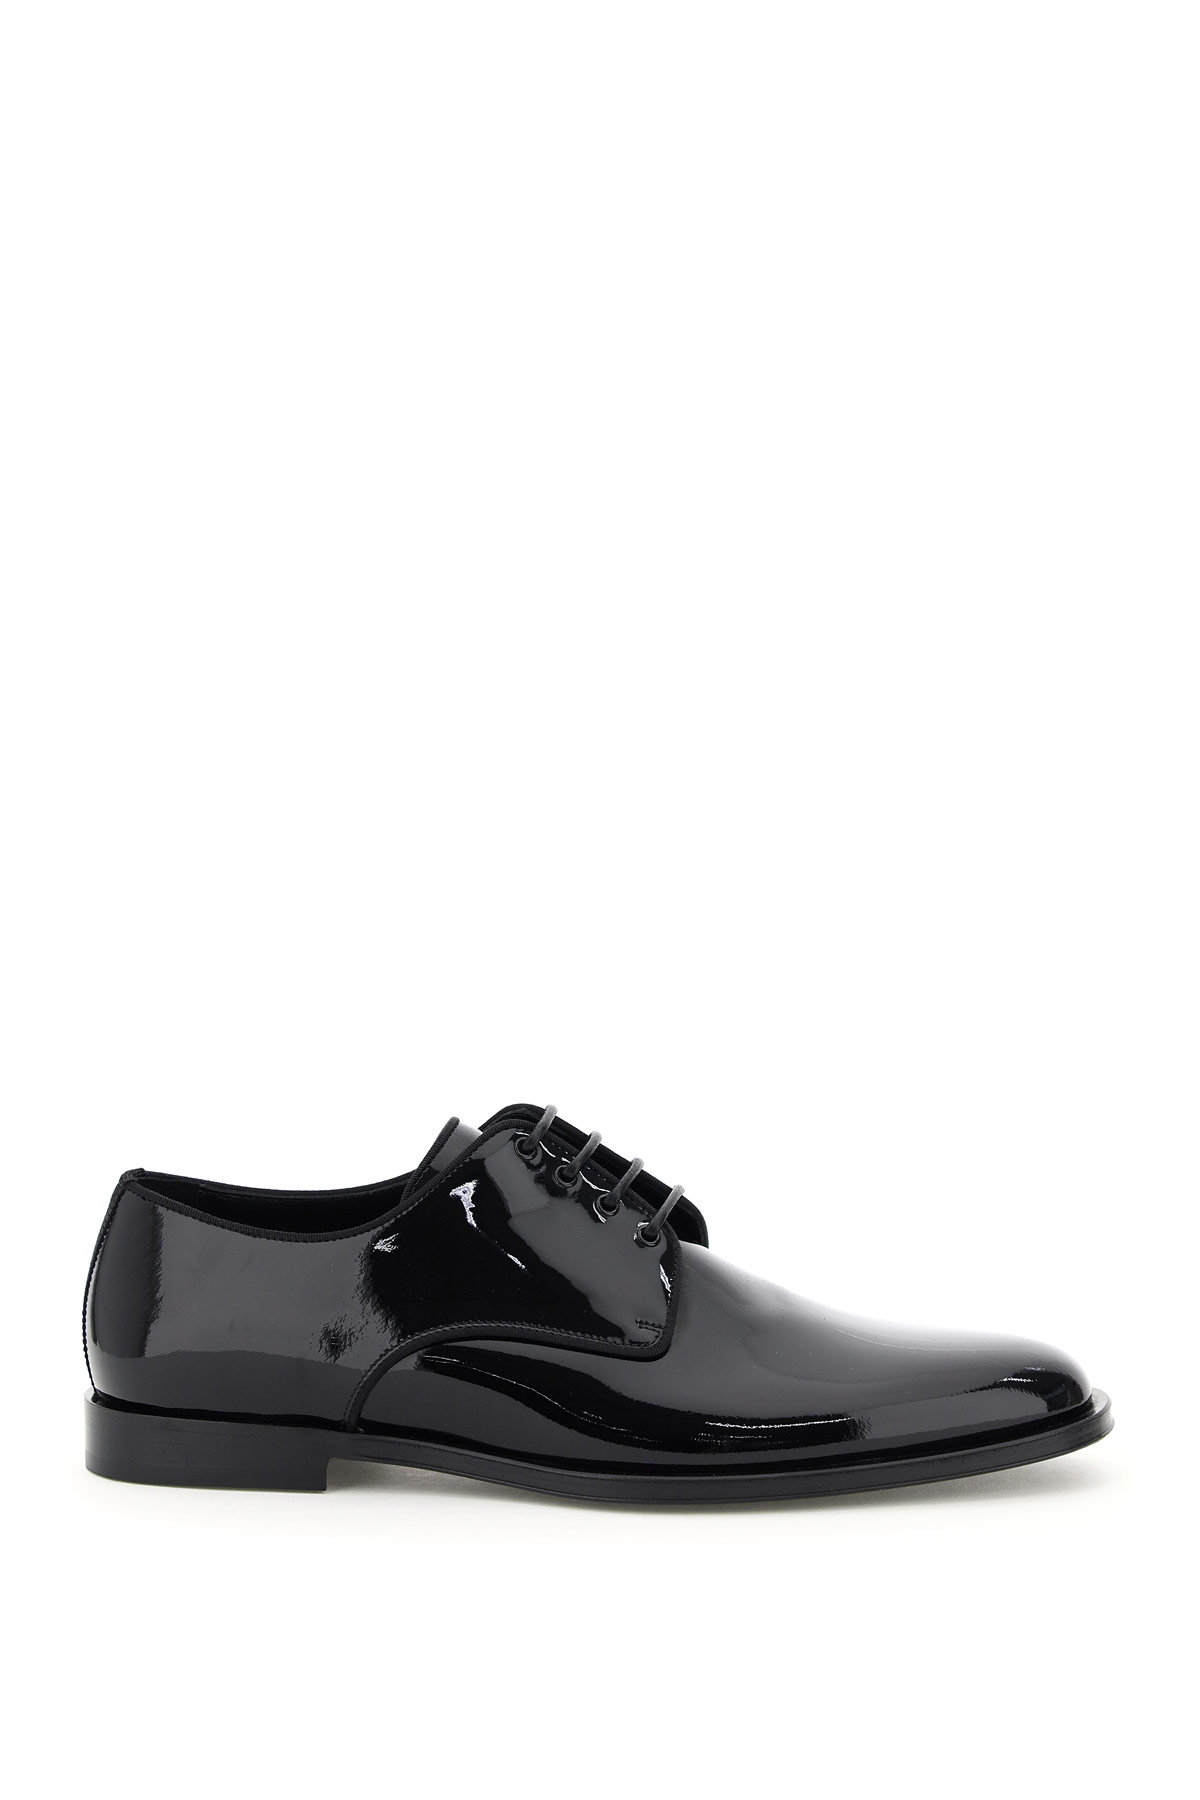 

POSITANO LACE-UPS, Black, Dolce & Gabbana patent Derby lace-ups with grosgrain hems. Leather and contrast quilted satin lining and leather sole.